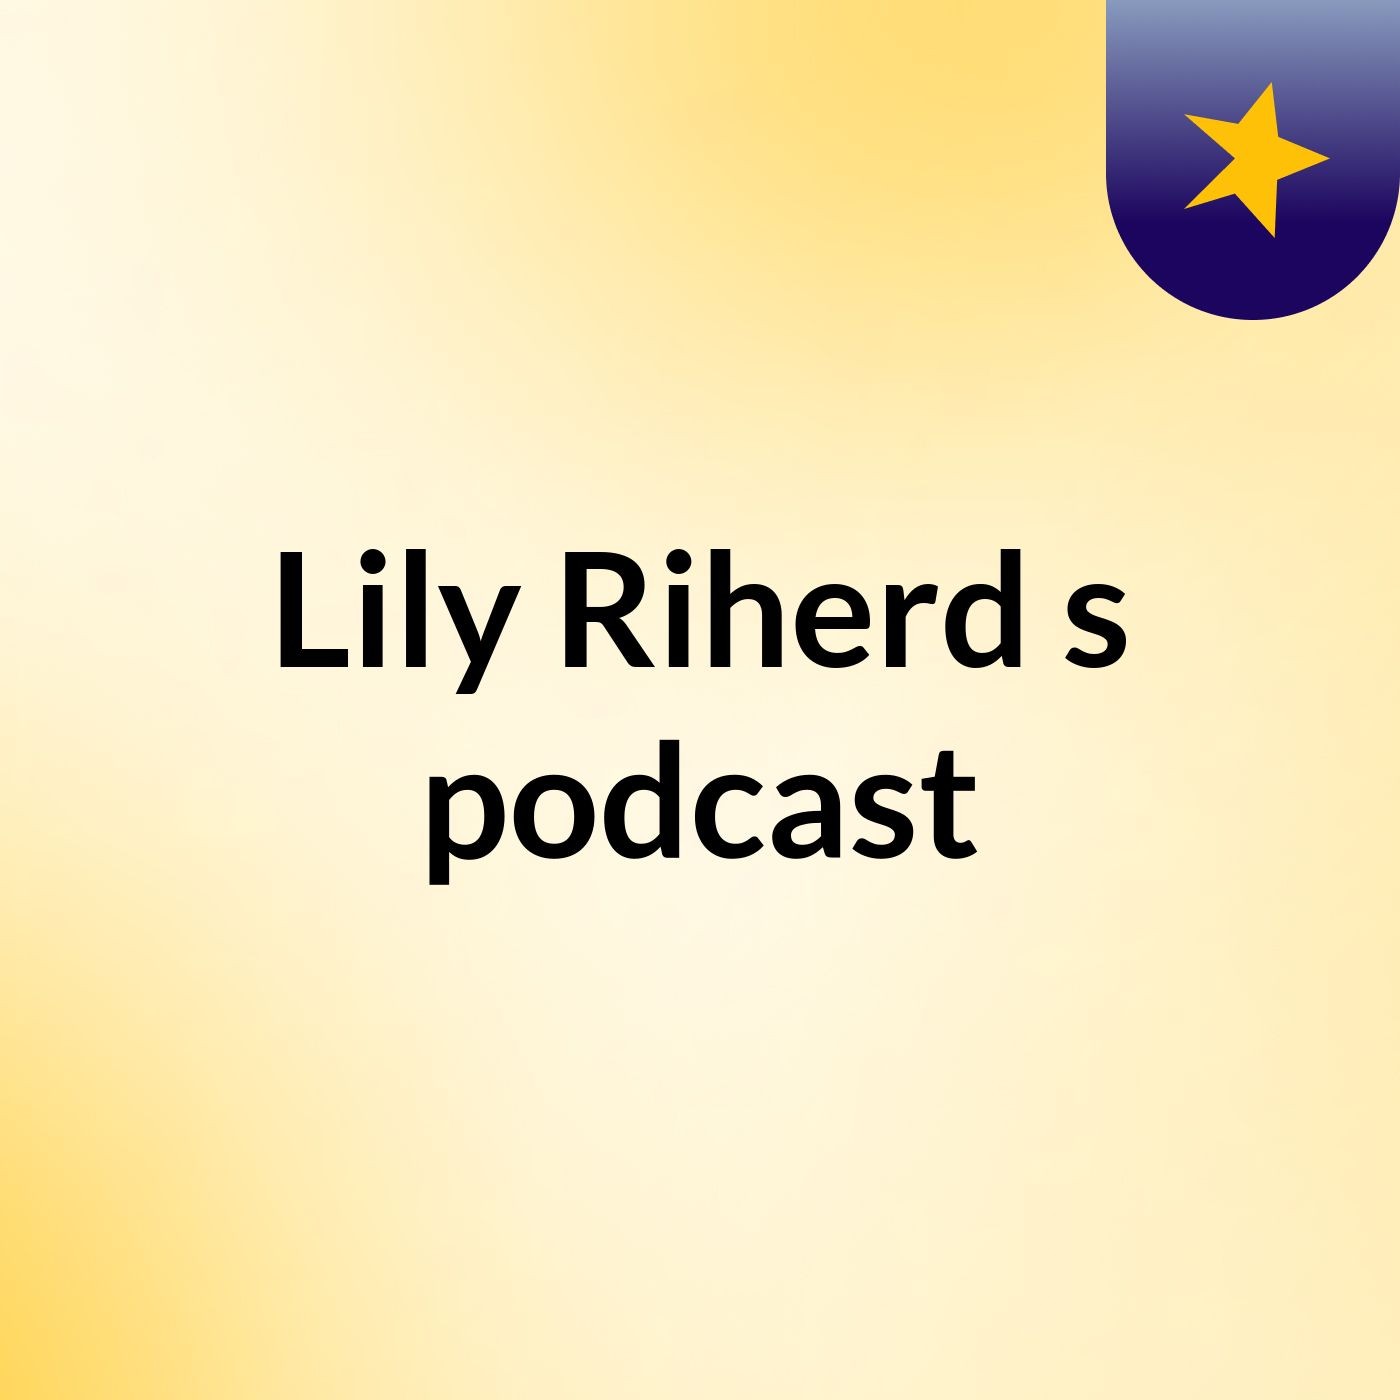 Episode 3 - Lily Riherd's podcast